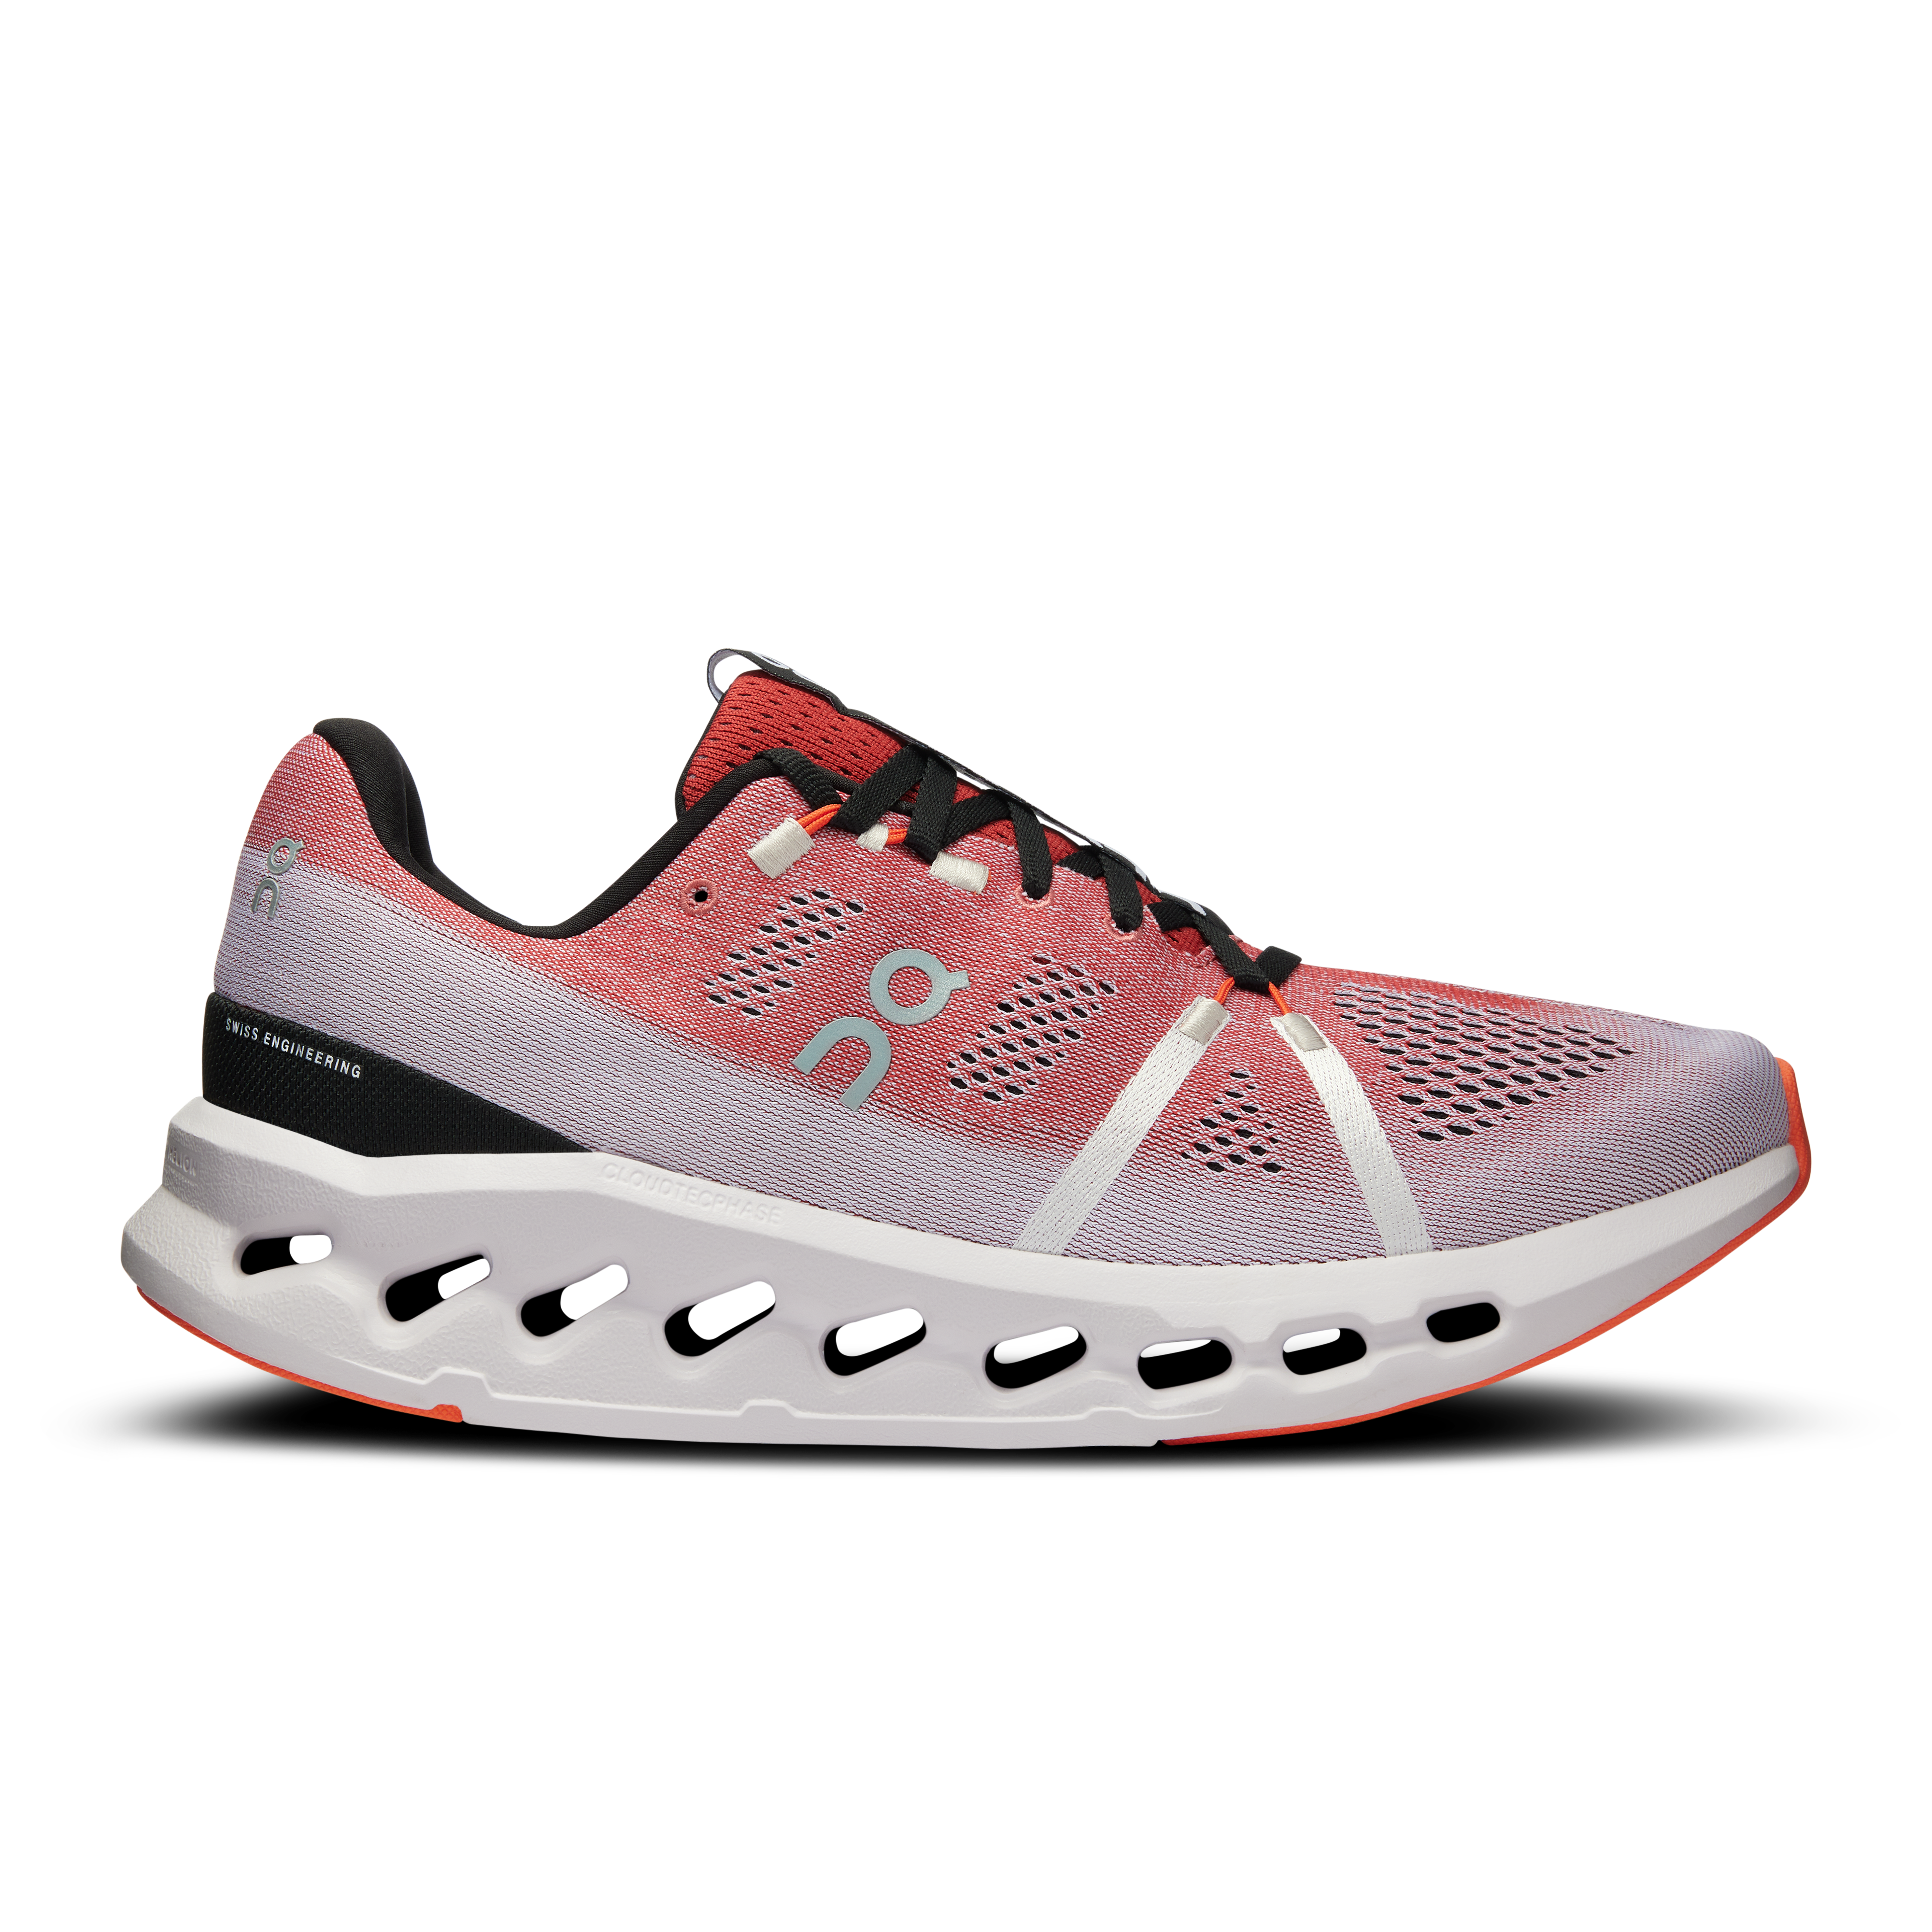 The Cloudsurfer: Cushioned Road Running Shoe | On India